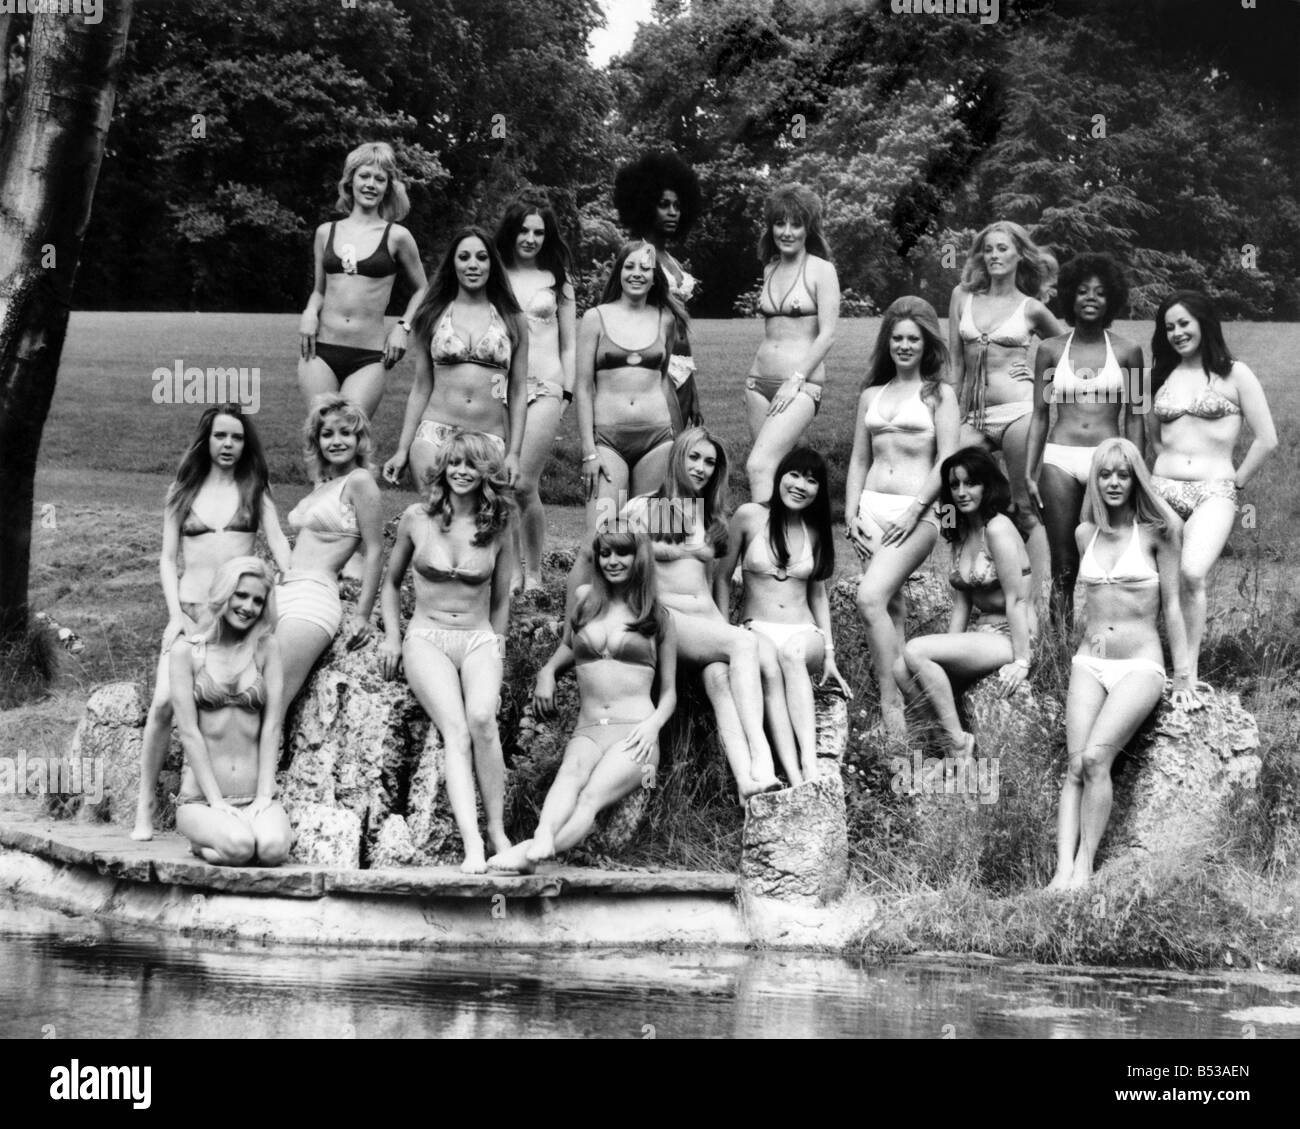 Fashion 1970s. ;25th anniversary of the bikini.  ;Group of models show off the two-piece swimming costume, sitting and standing Stock Photo